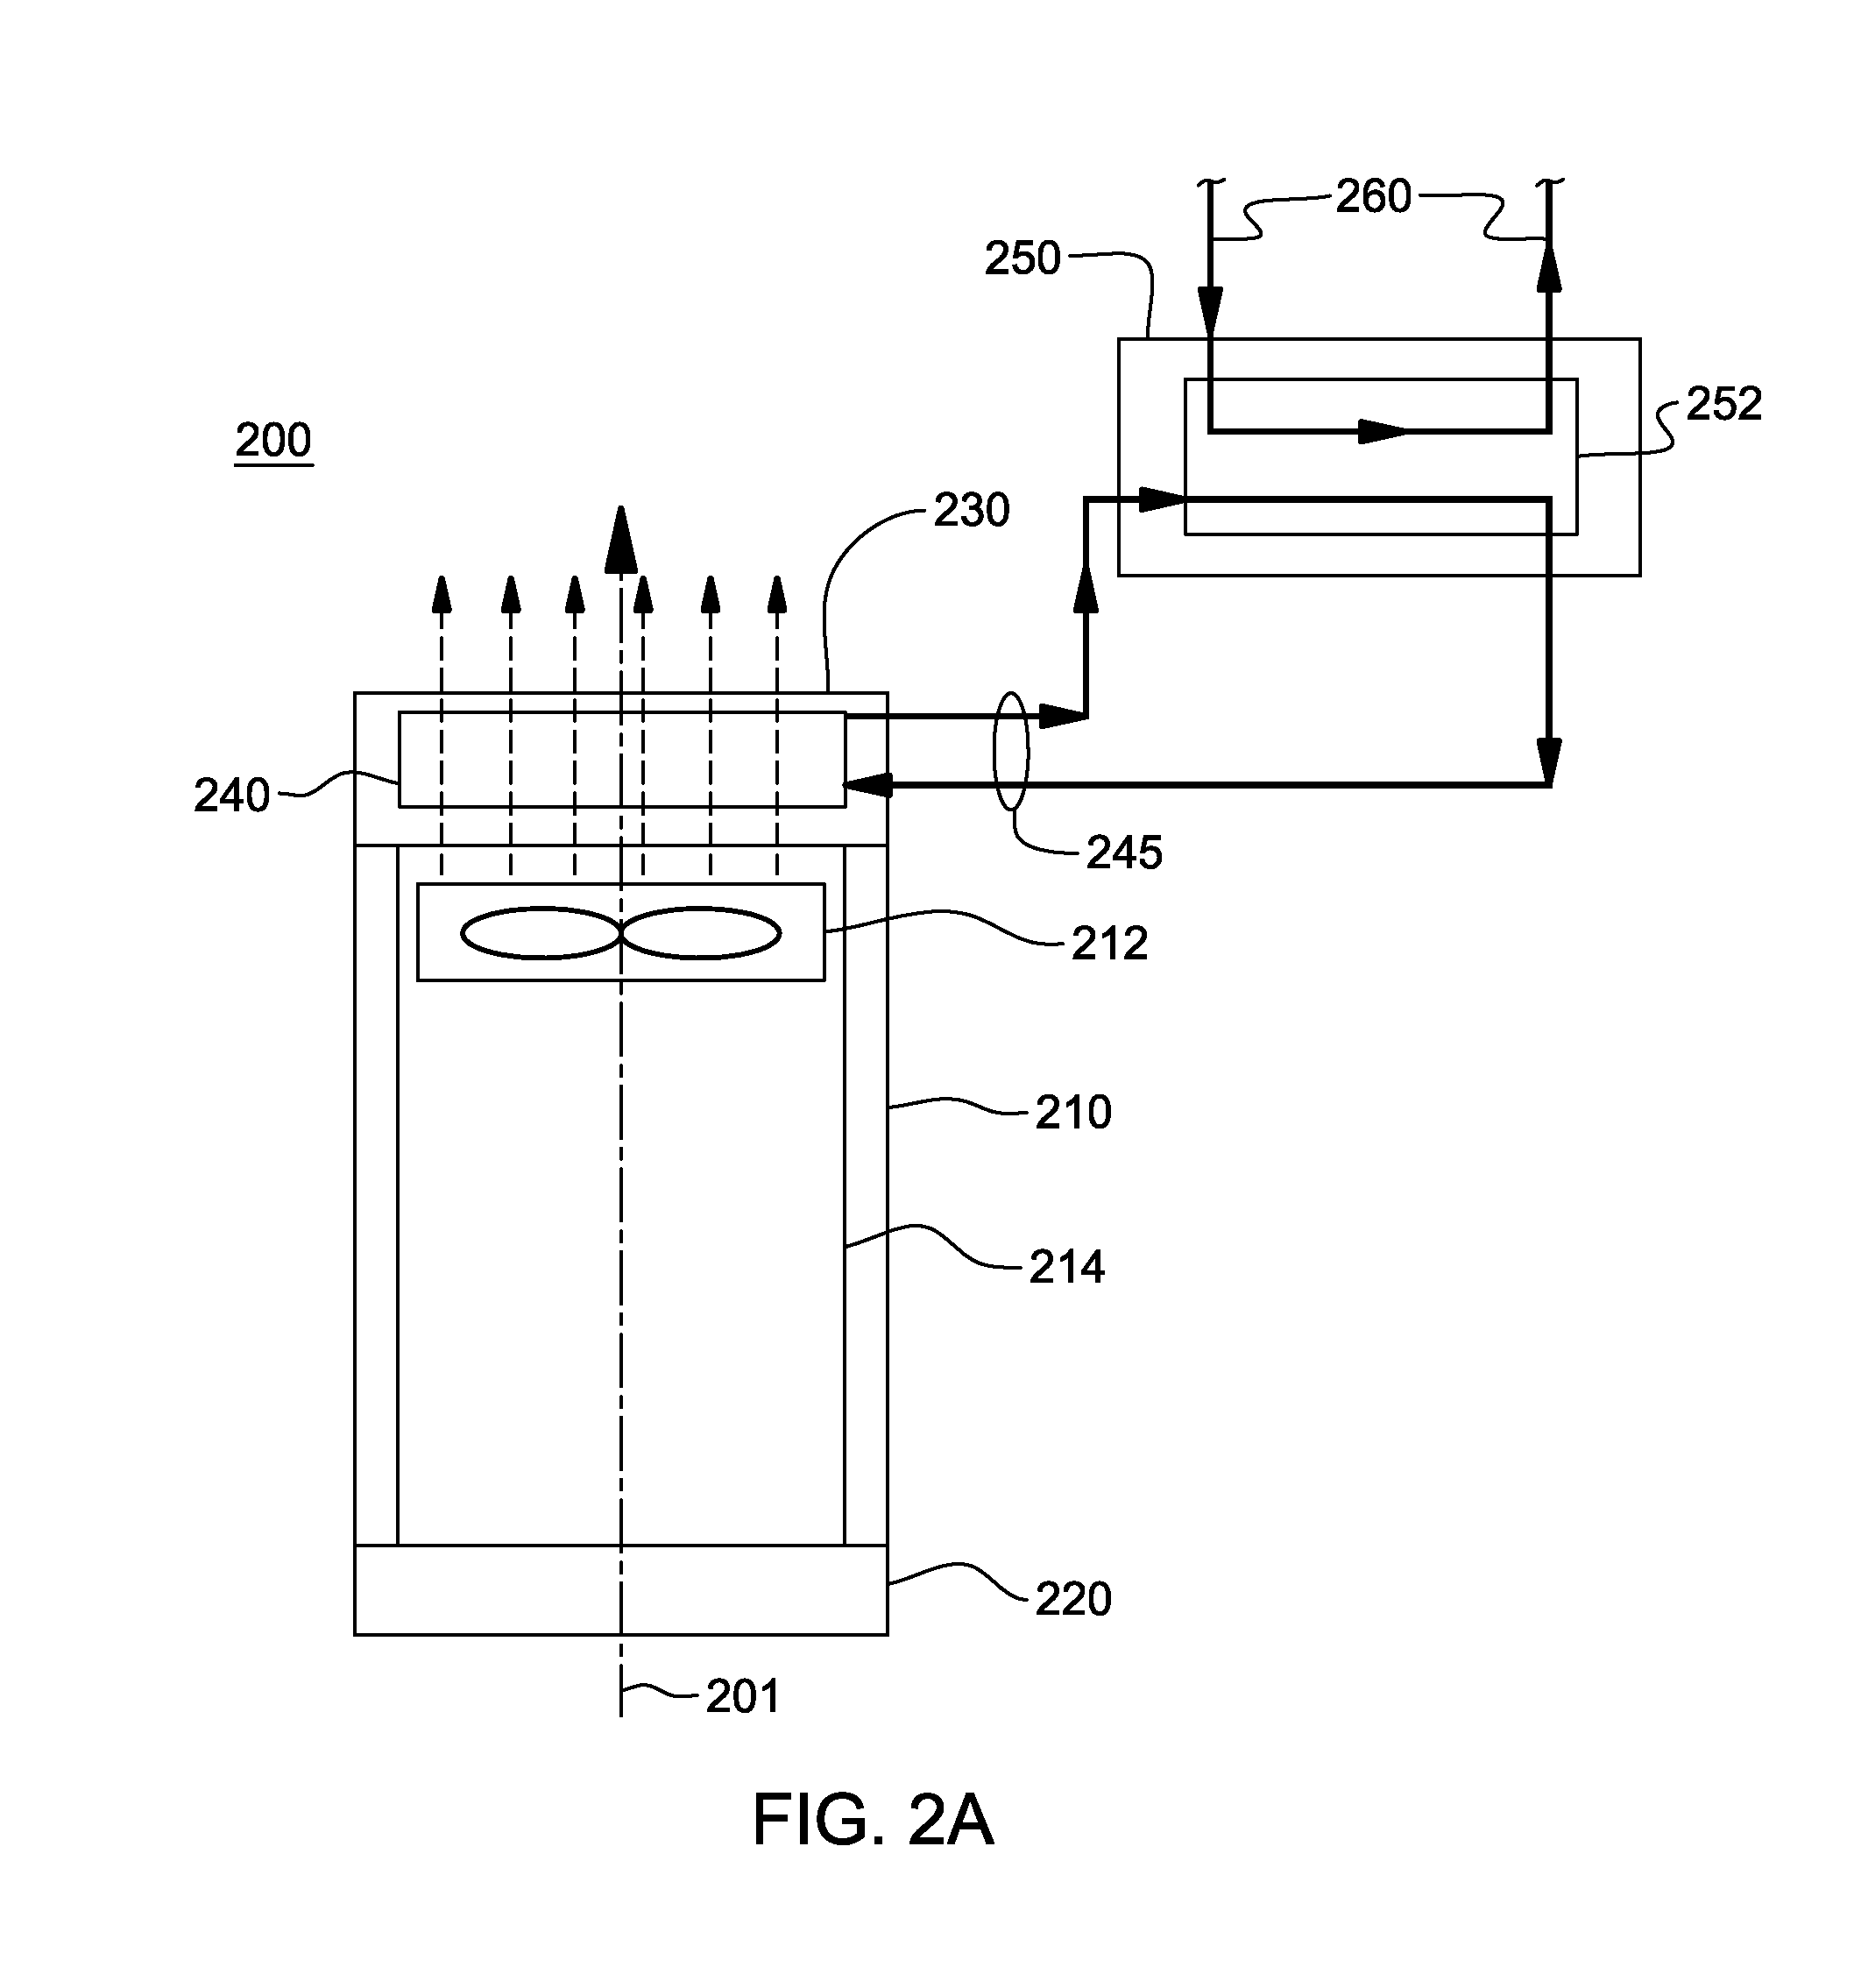 Structural configuration of a heat exchanger door for an electronics rack